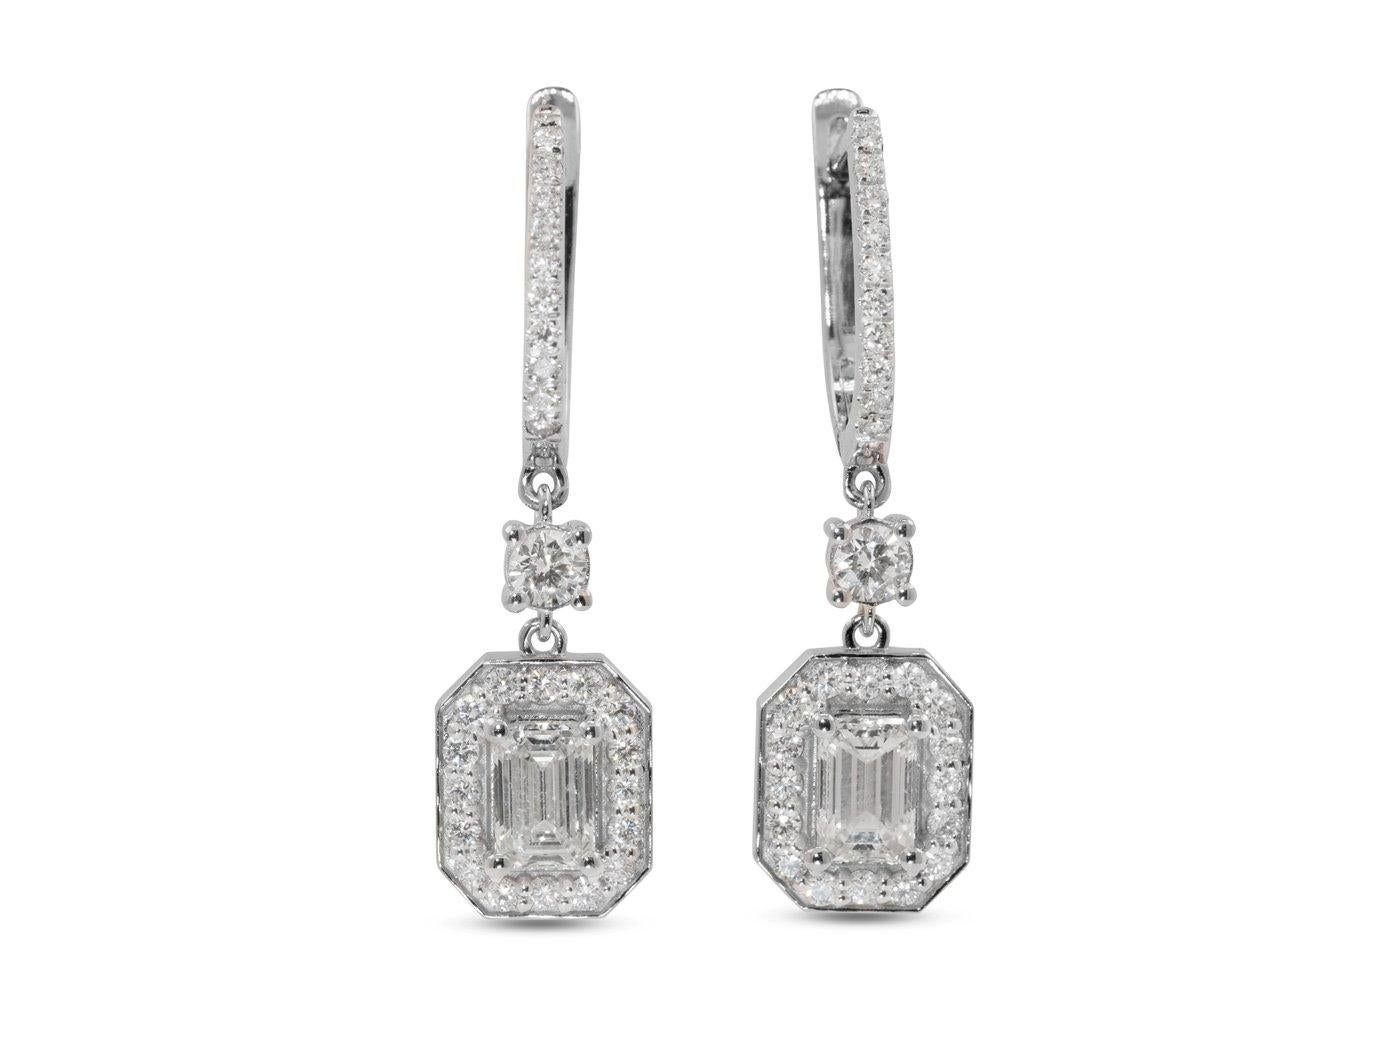 Sparkling 18k White gold Dangle Earrings with 1.50 ct Natural Diamond GIA Cert 1